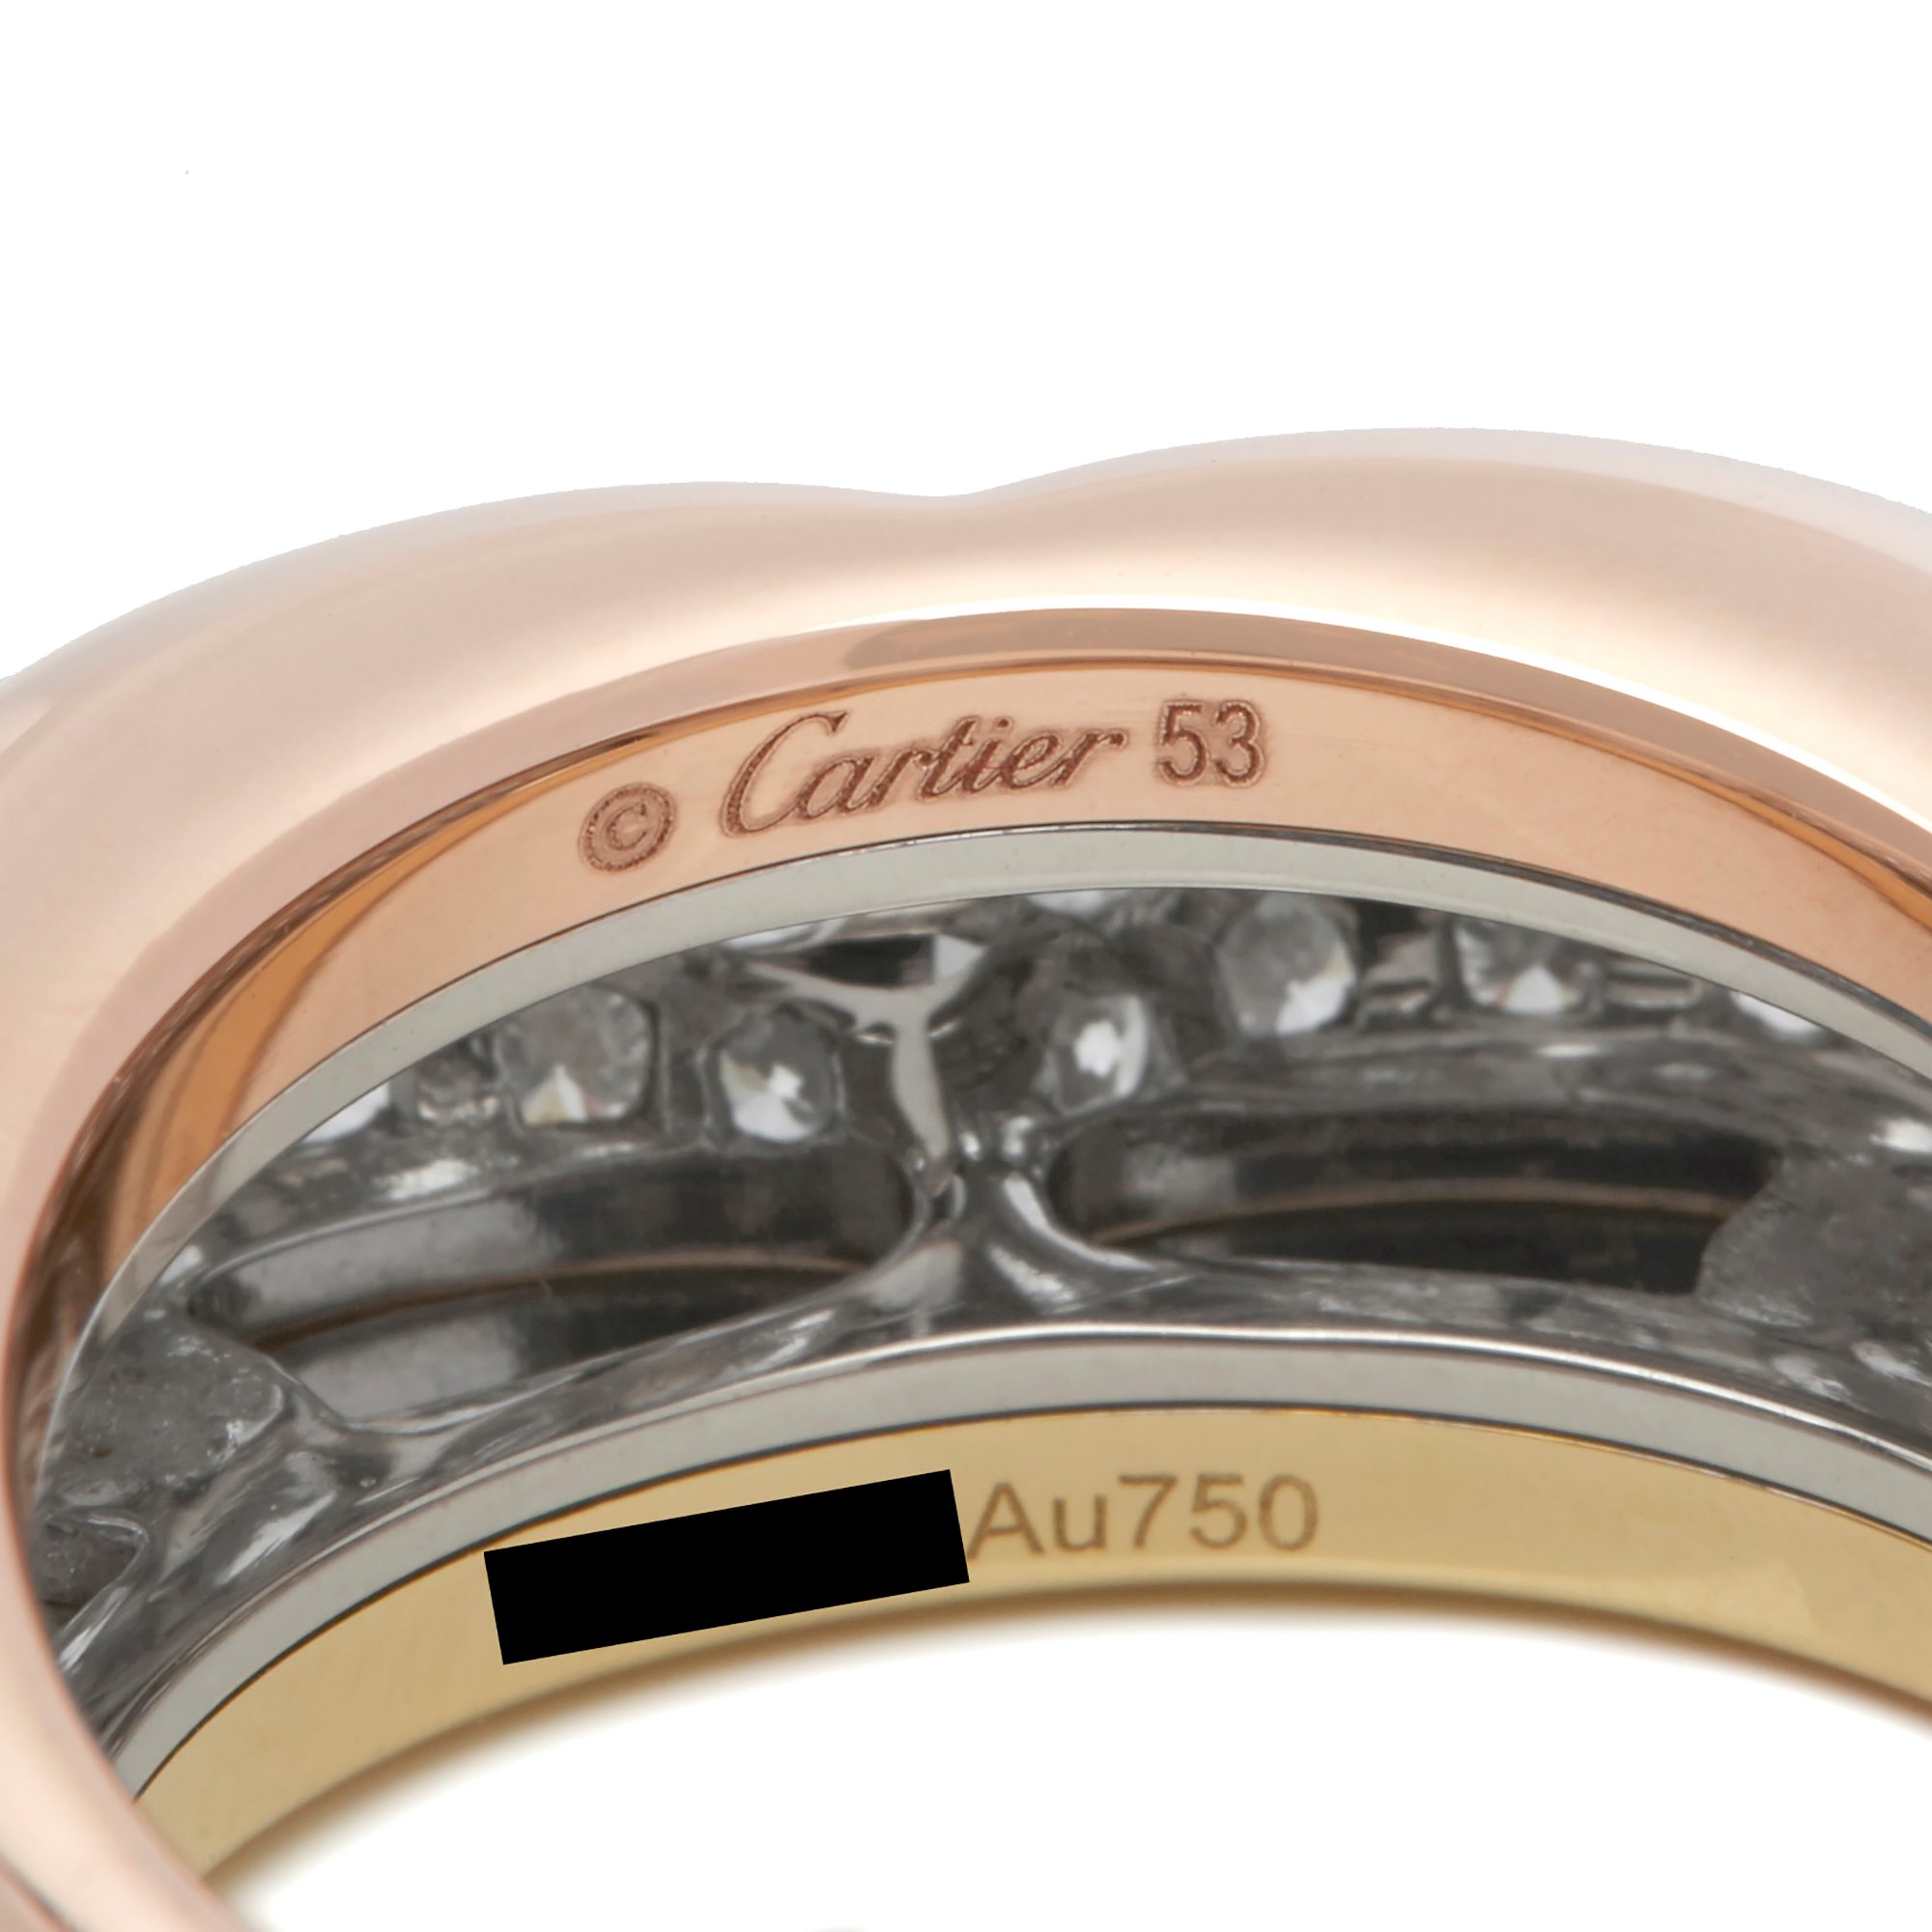 Cartier 18k Yellow, White and Rose Gold Diamond Heart Shaped Ring